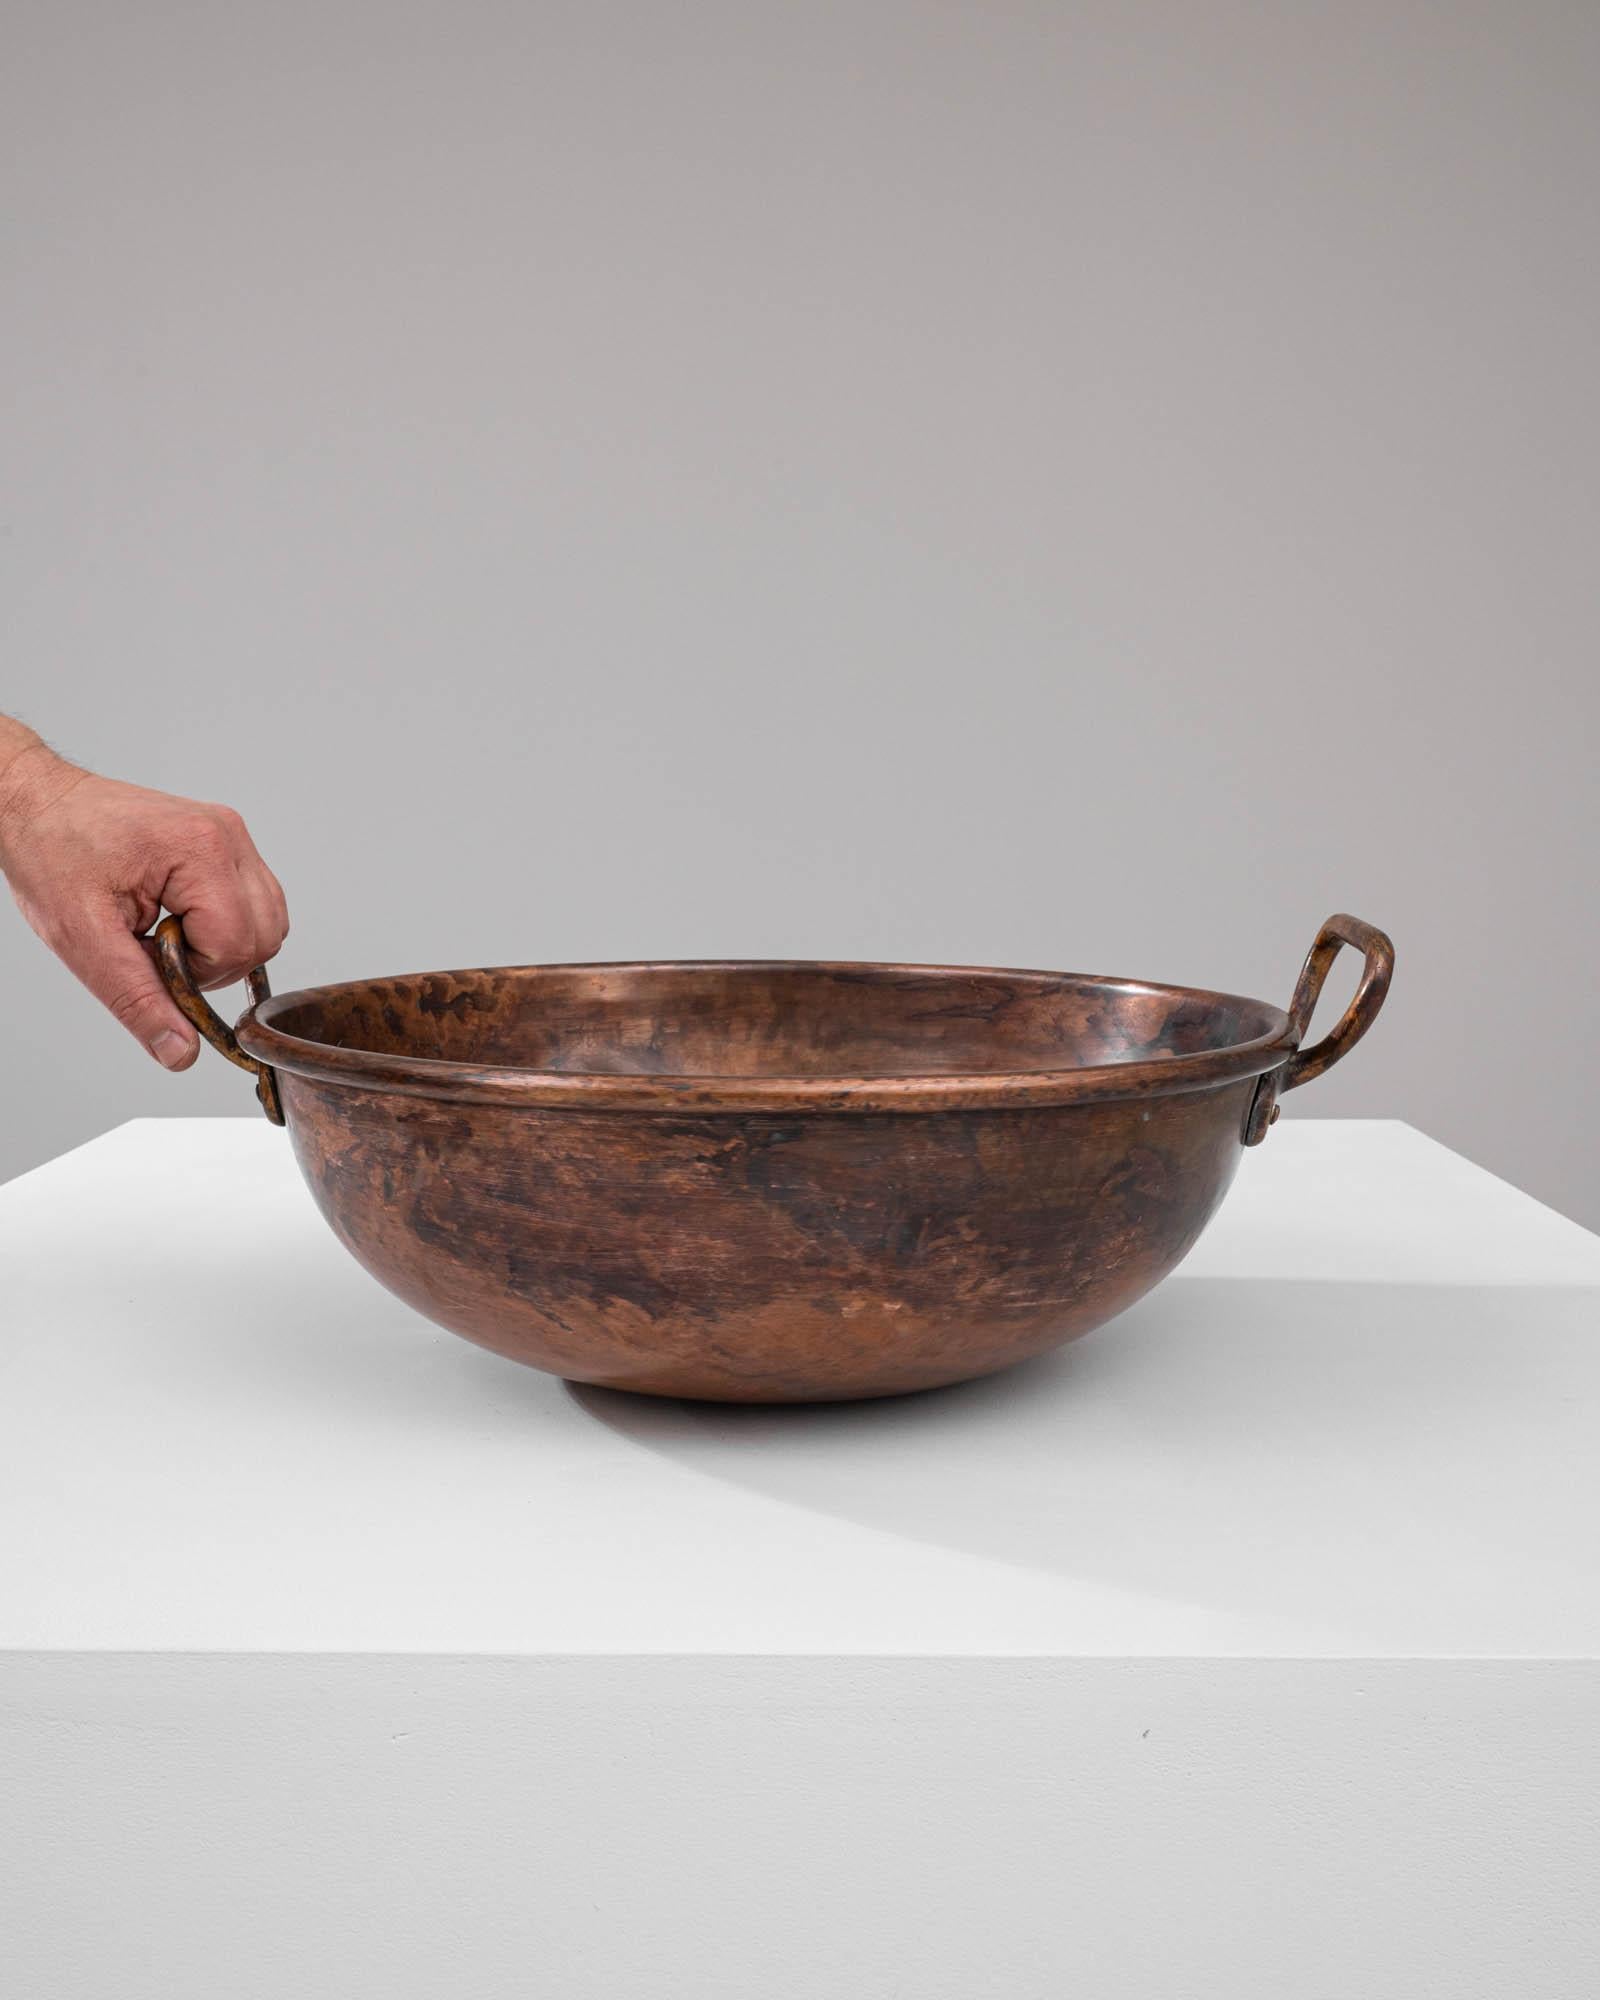 Step back in time with this authentic Early 19th Century Copper Pot, a vessel steeped in history and character. This copper cauldron, with its deep, round basin, has been handcrafted to stand the test of time, its surface worn to a rich, deep patina